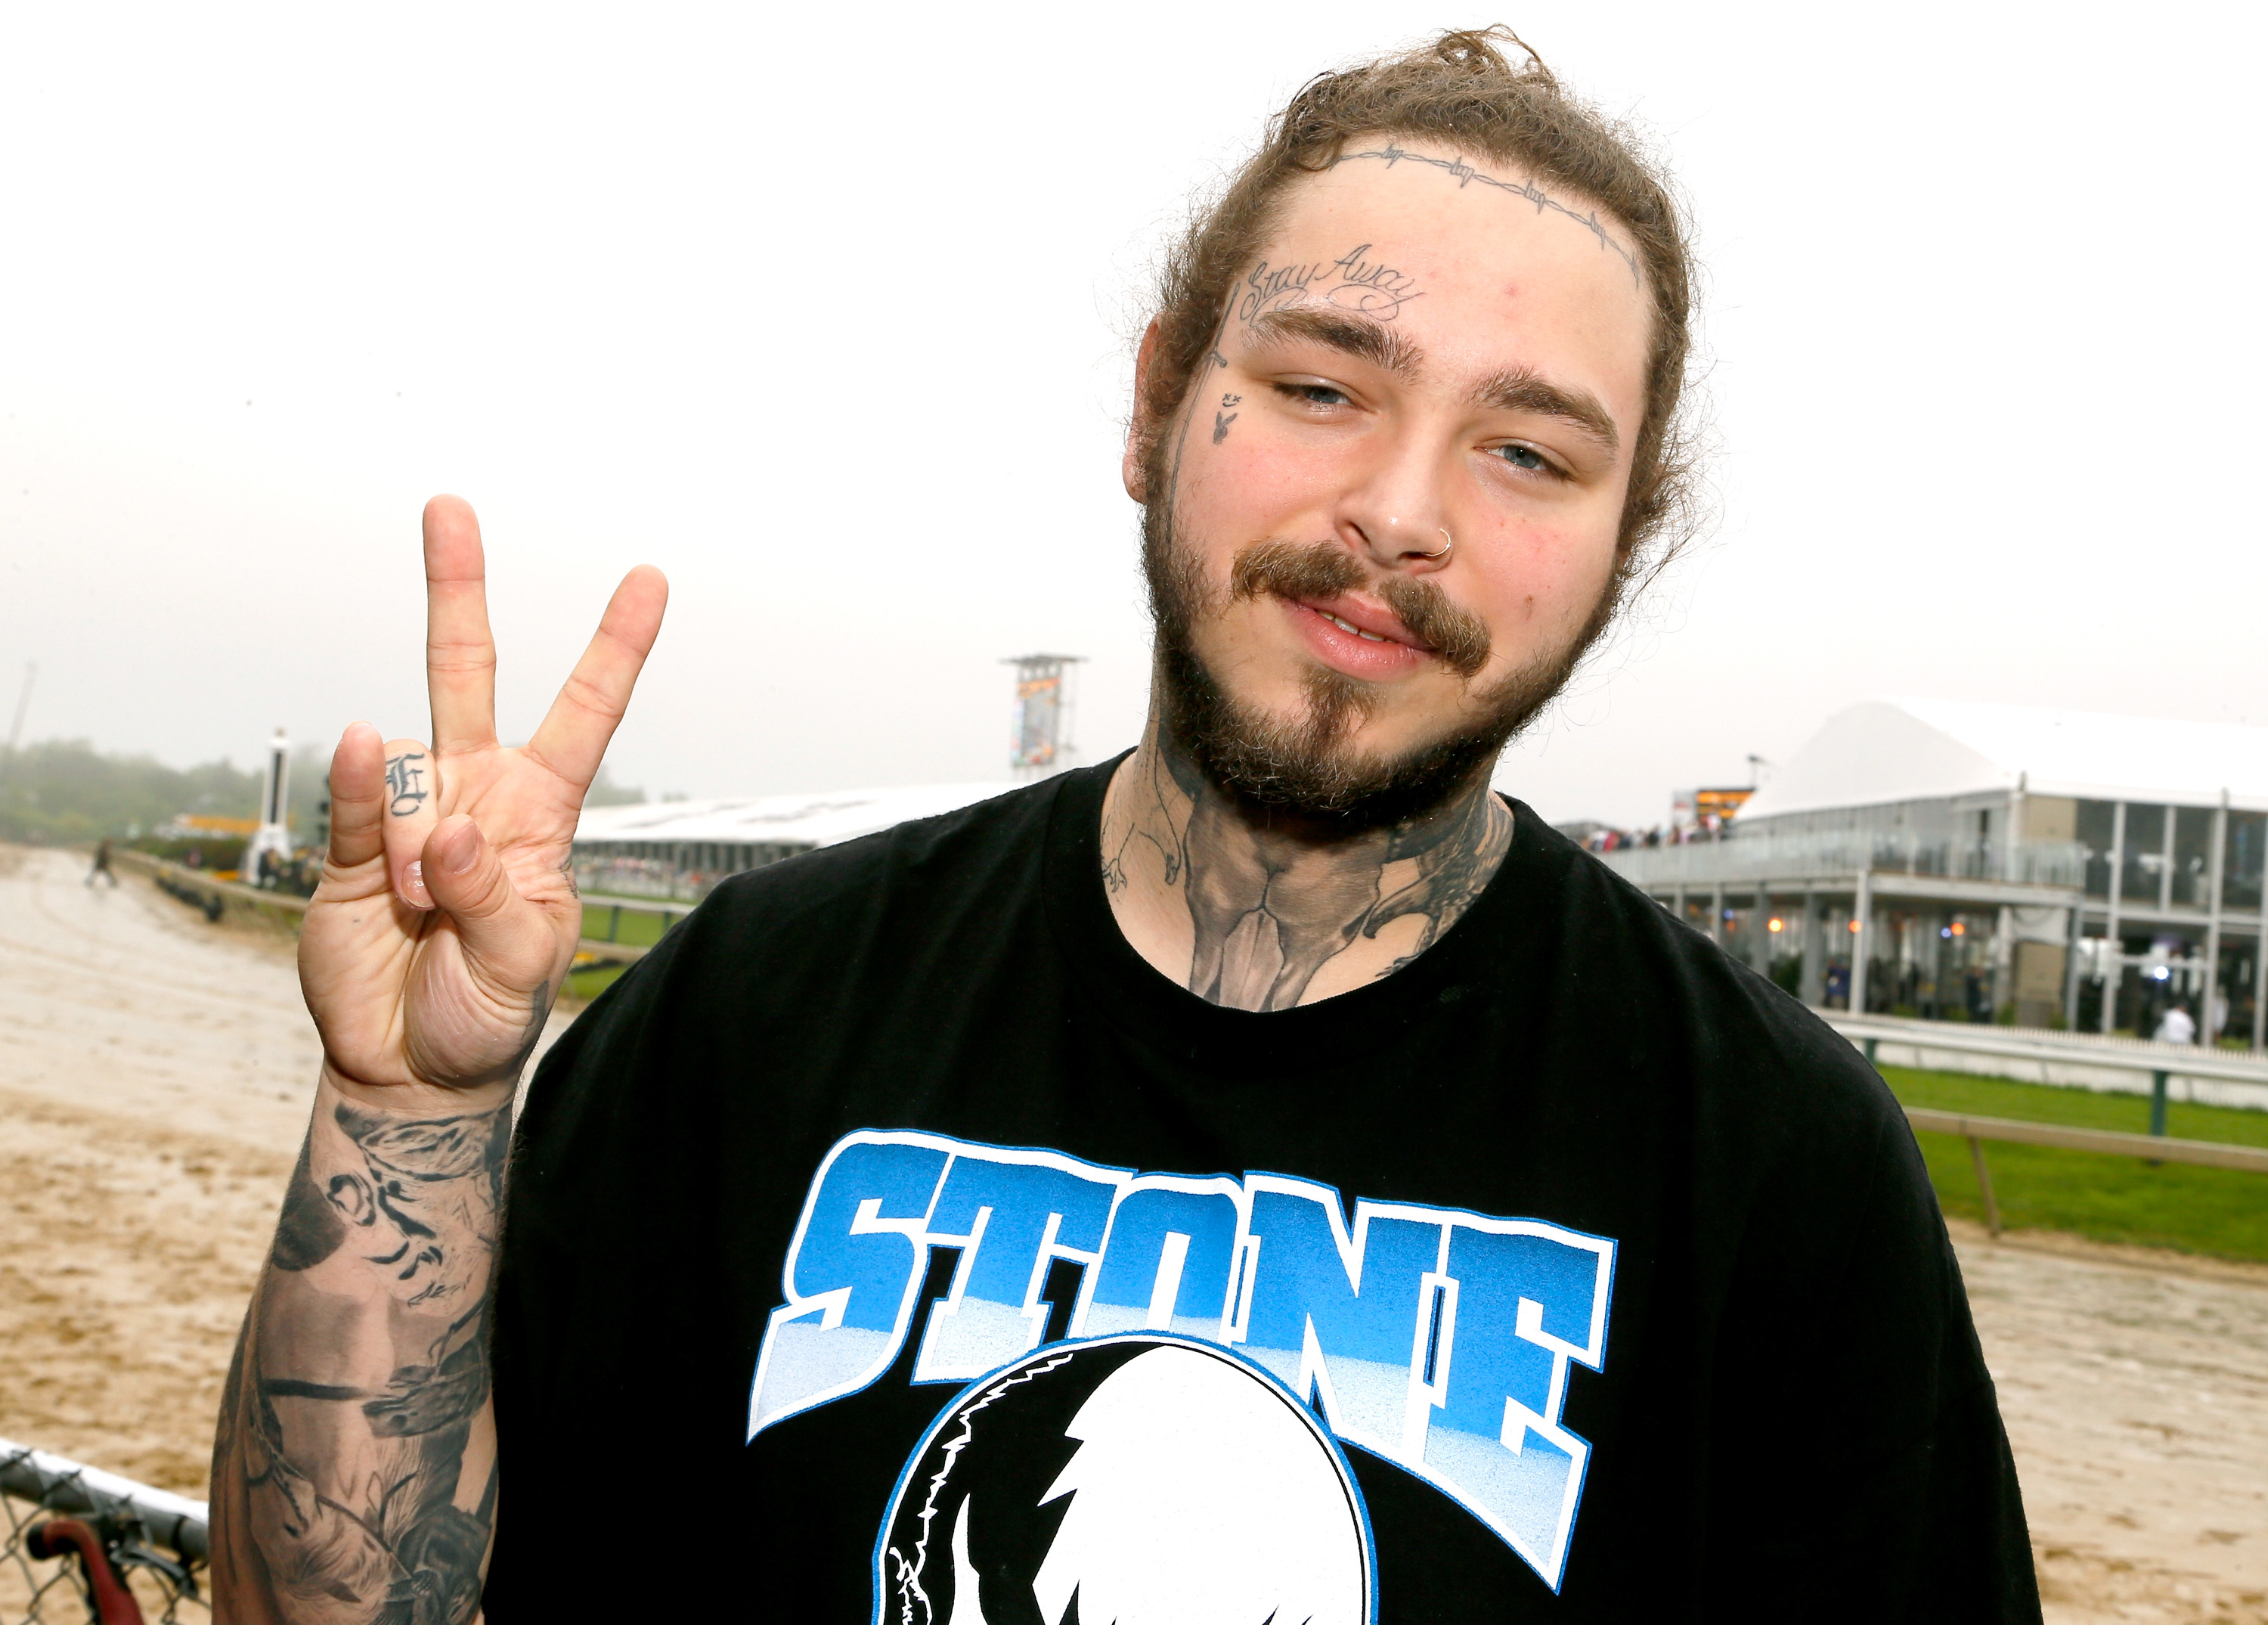 Post Malone attends The Stronach Group Chalet at 143rd Preakness Stakes on May 19, 2018, in Baltimore, Maryland. | Source: Getty Images